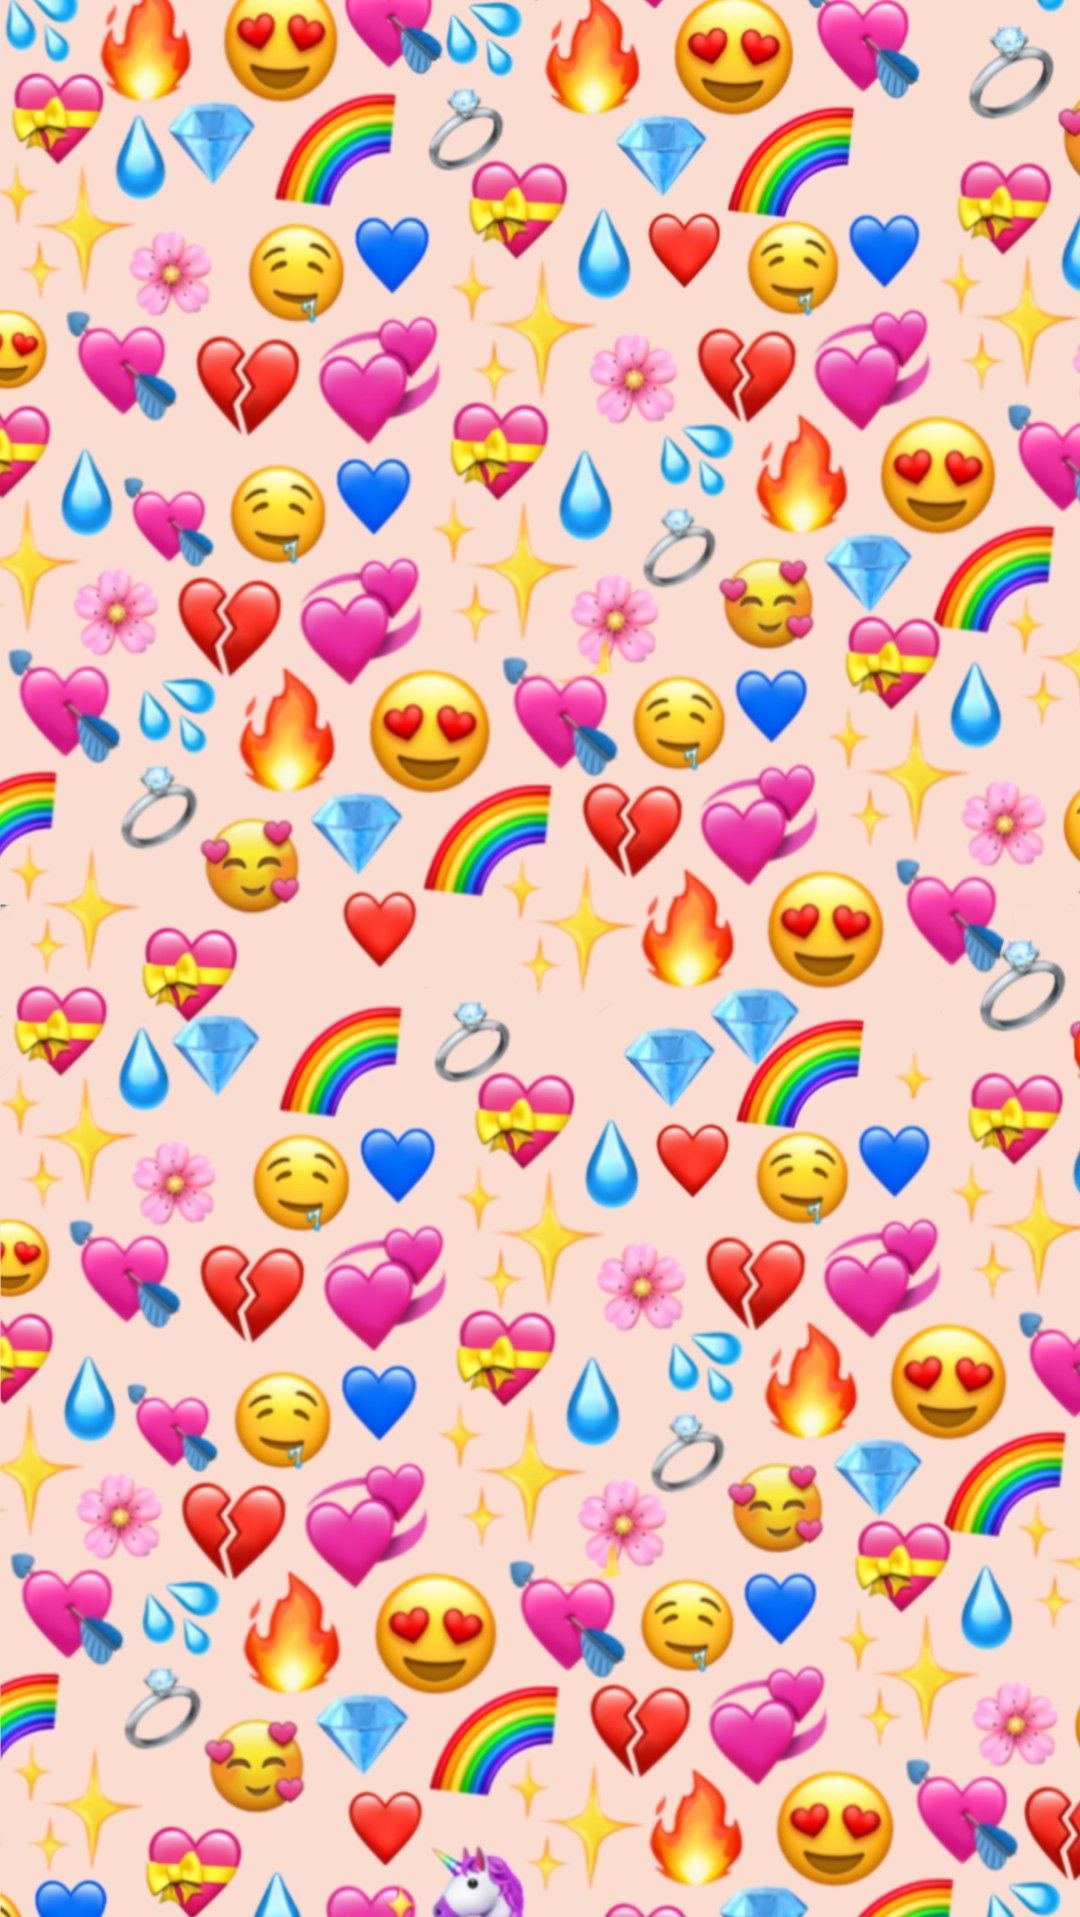 Emoji For Iphone Wallpapers